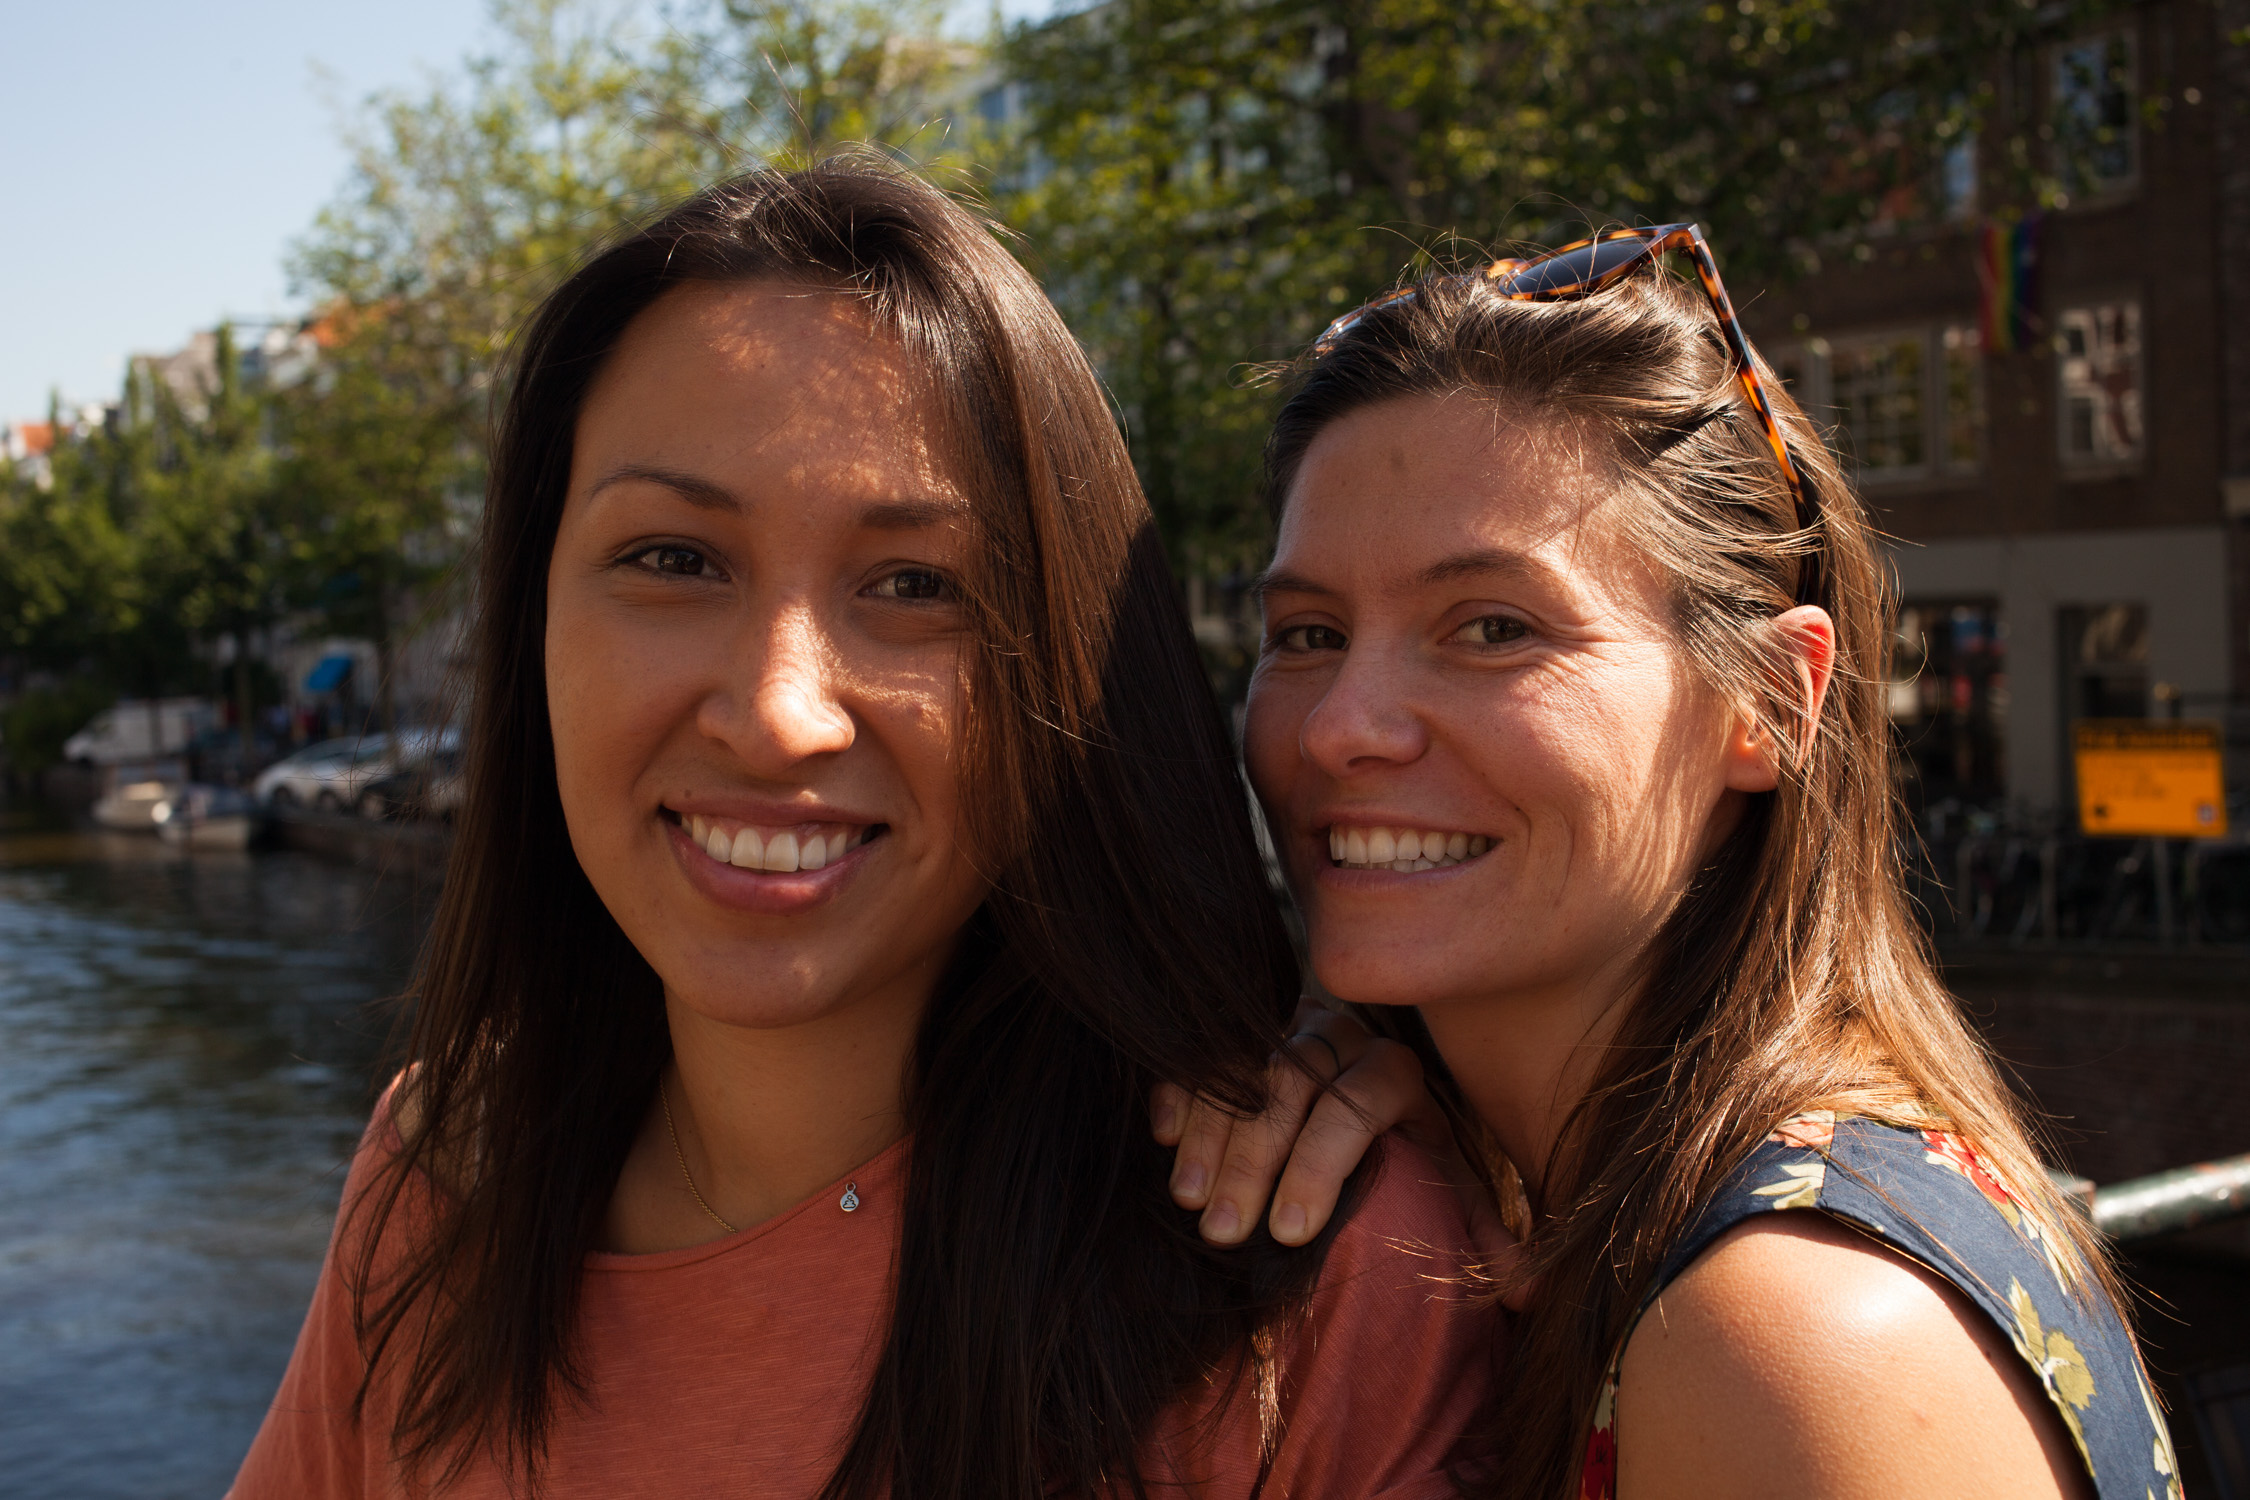 Two women standing next to each other and smiling in front of a canal